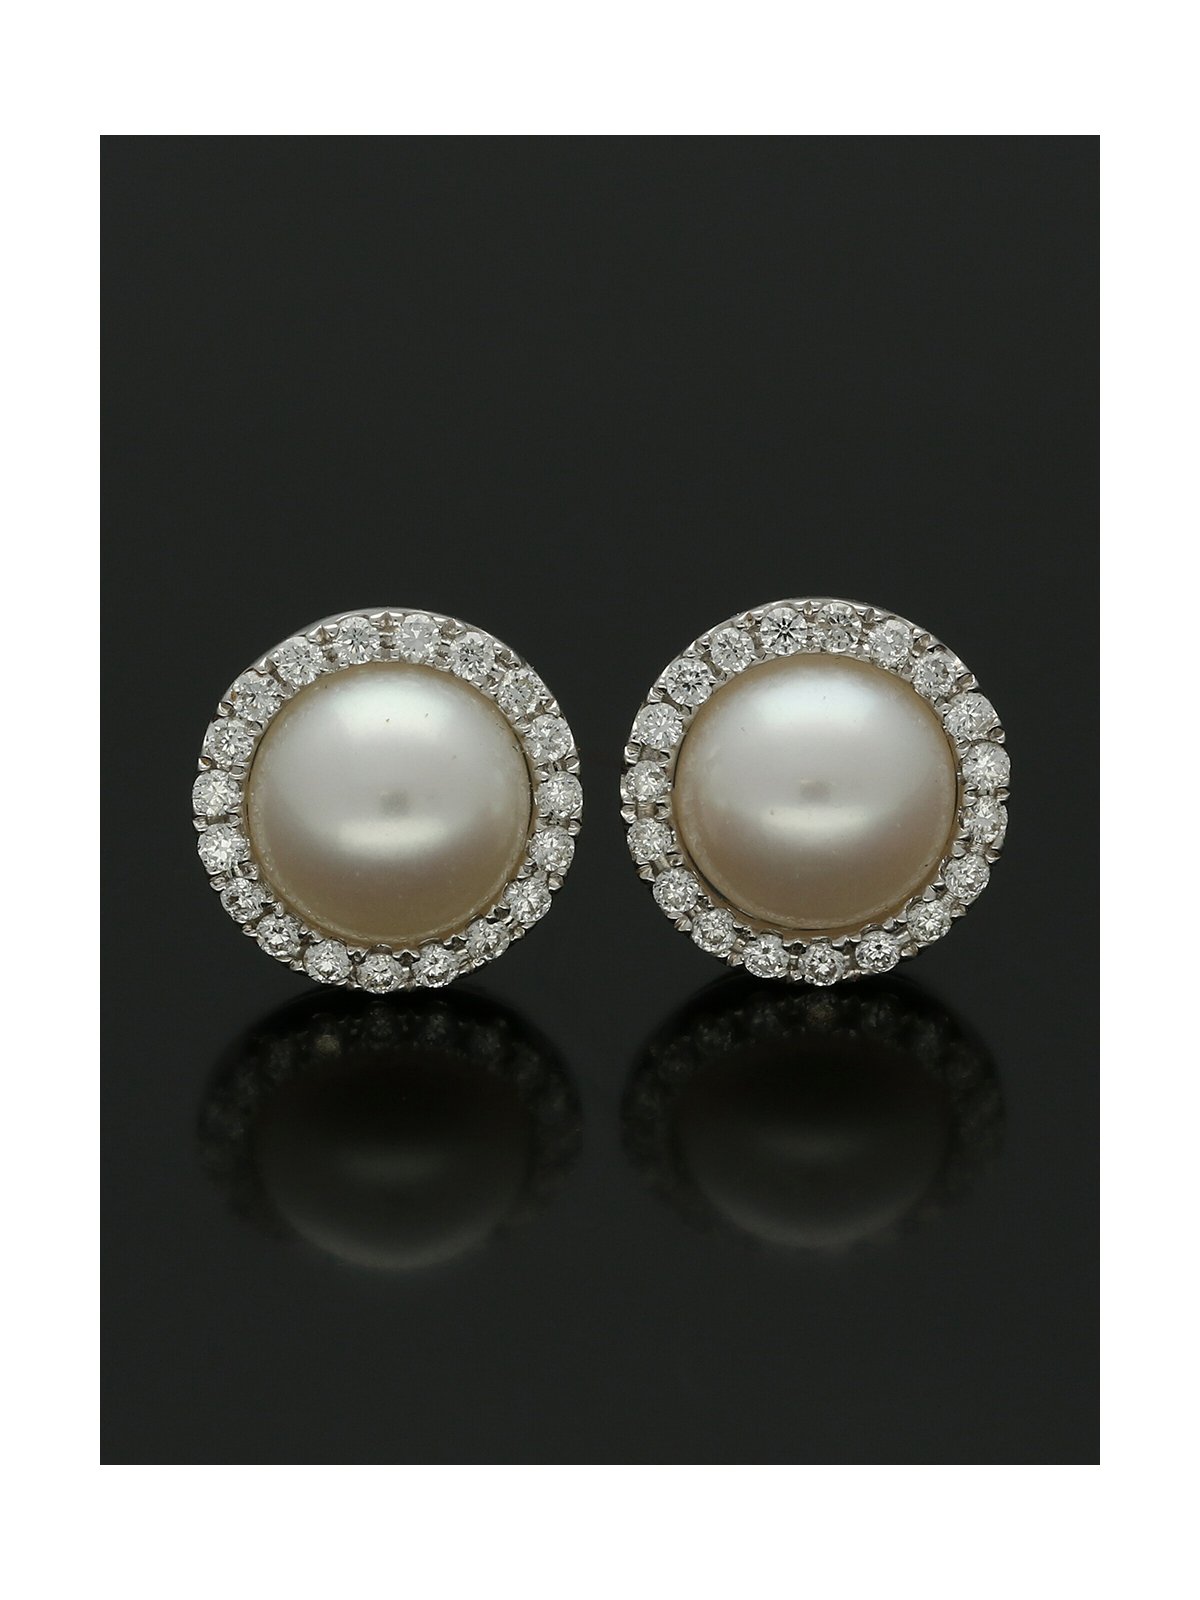 White Freshwater Pearl and Diamond Earrings in 18ct White Gold